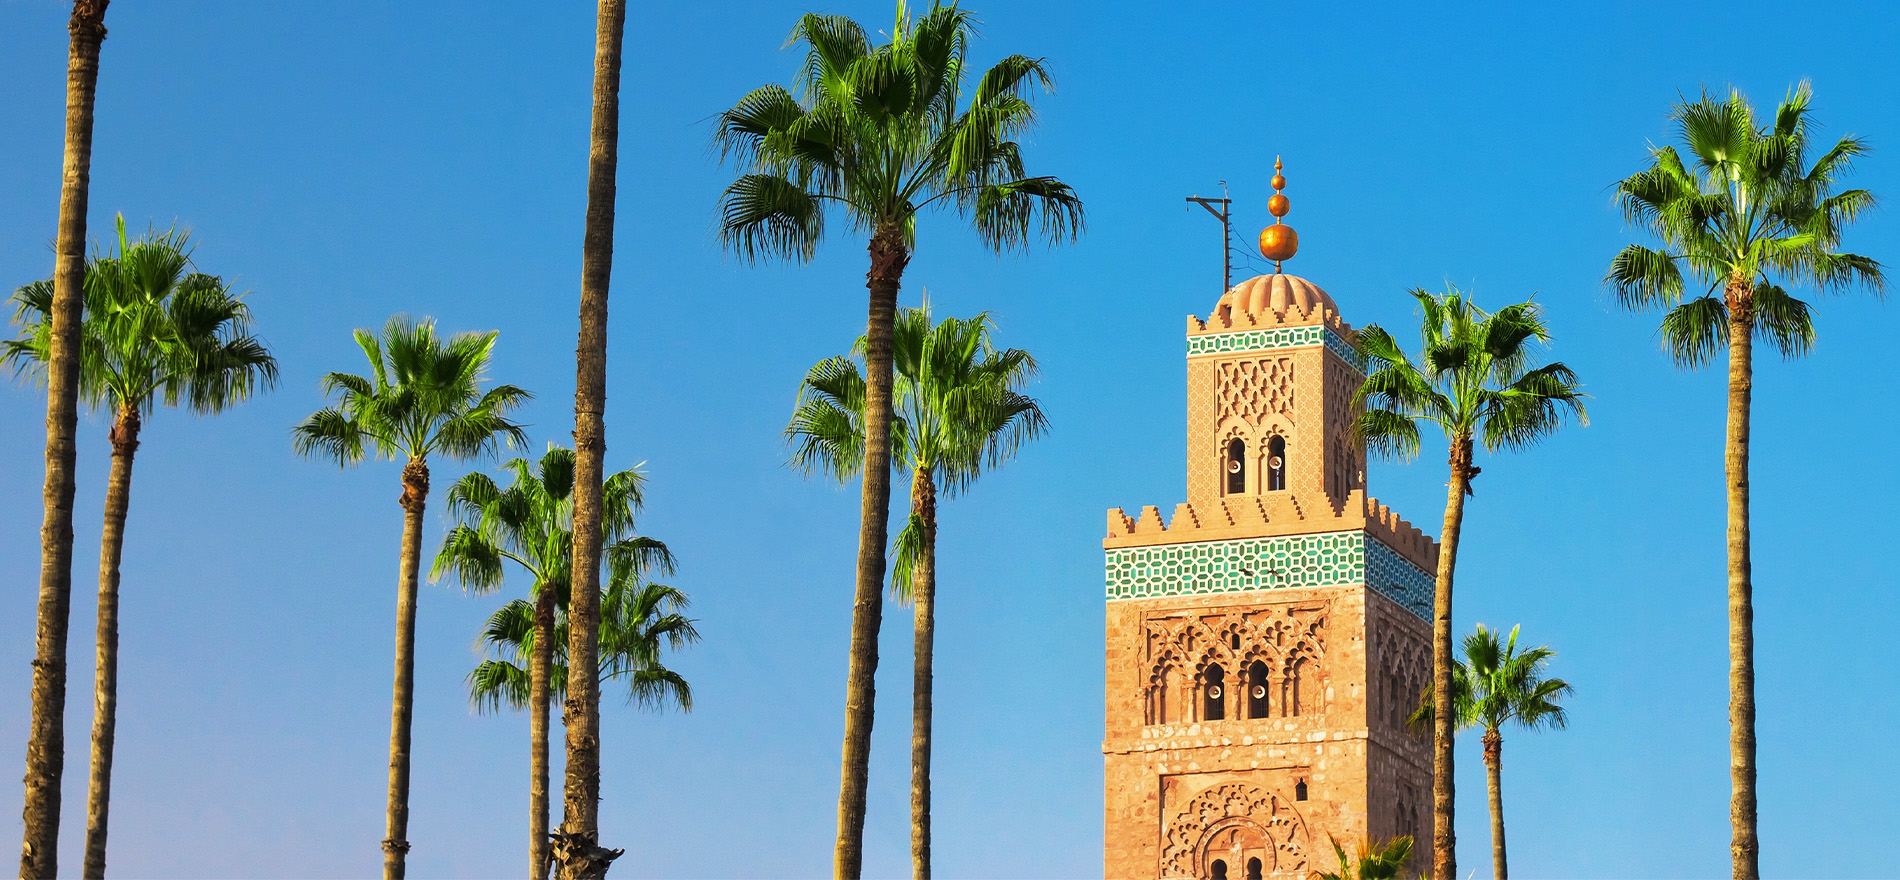 Blue sky, palm trees and a small tower in marrakech